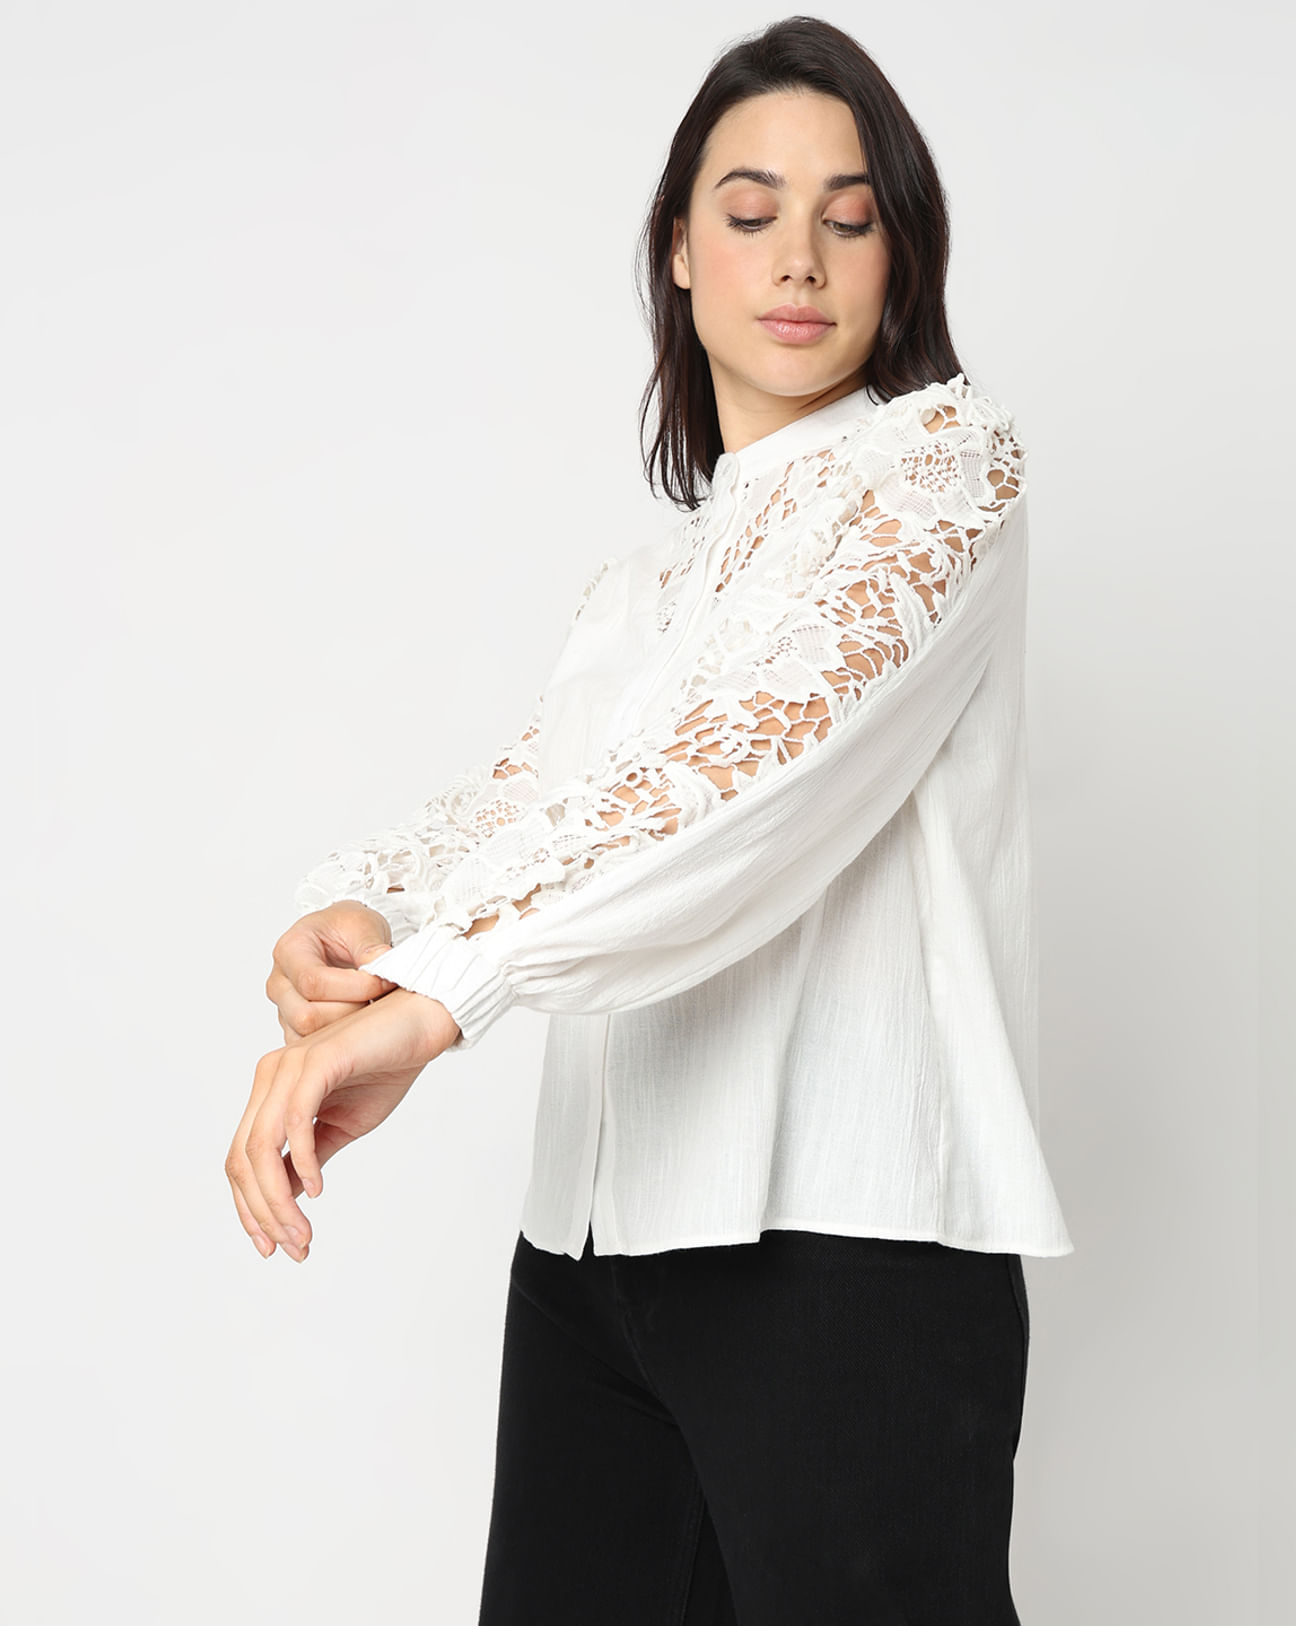 Vero Moda lace overlay long sleeved top with cami lining in deep